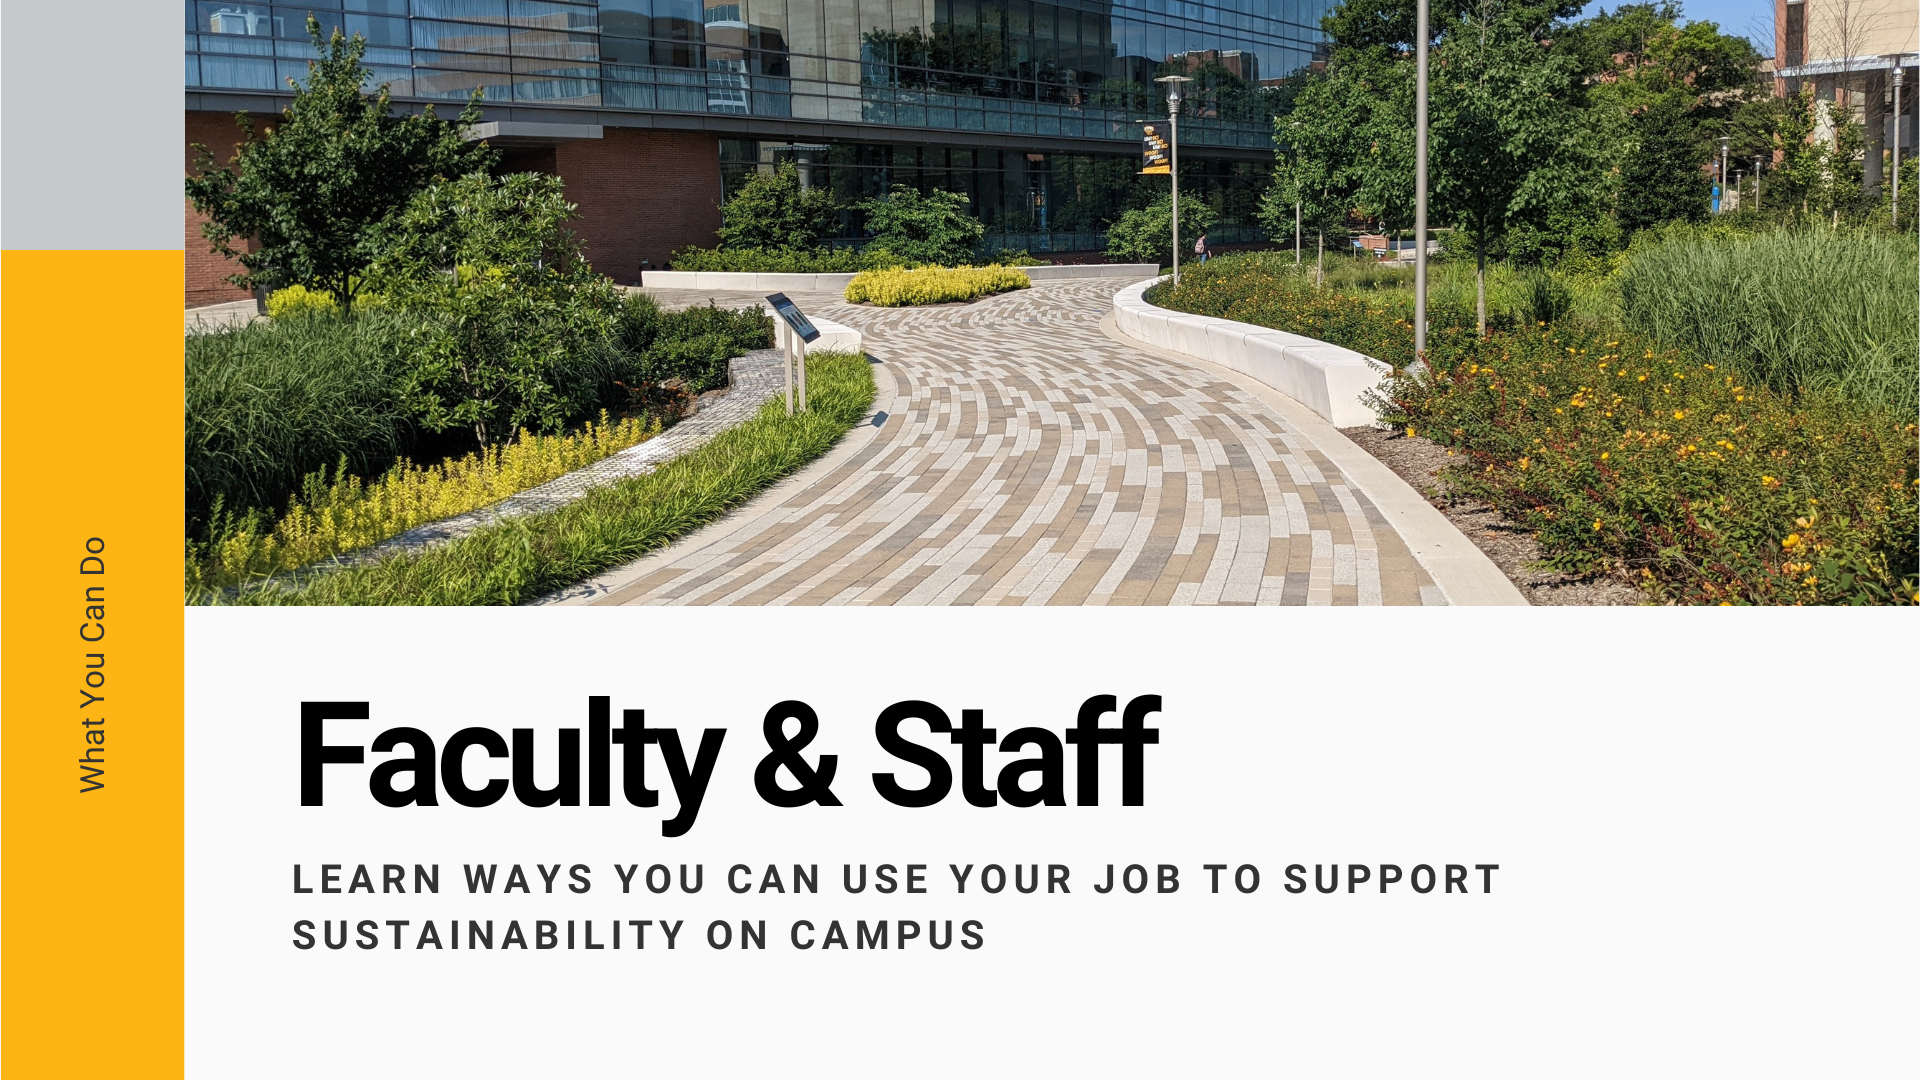 Faculty and Staff: Learn ways you can use your job to support sustainability on campus